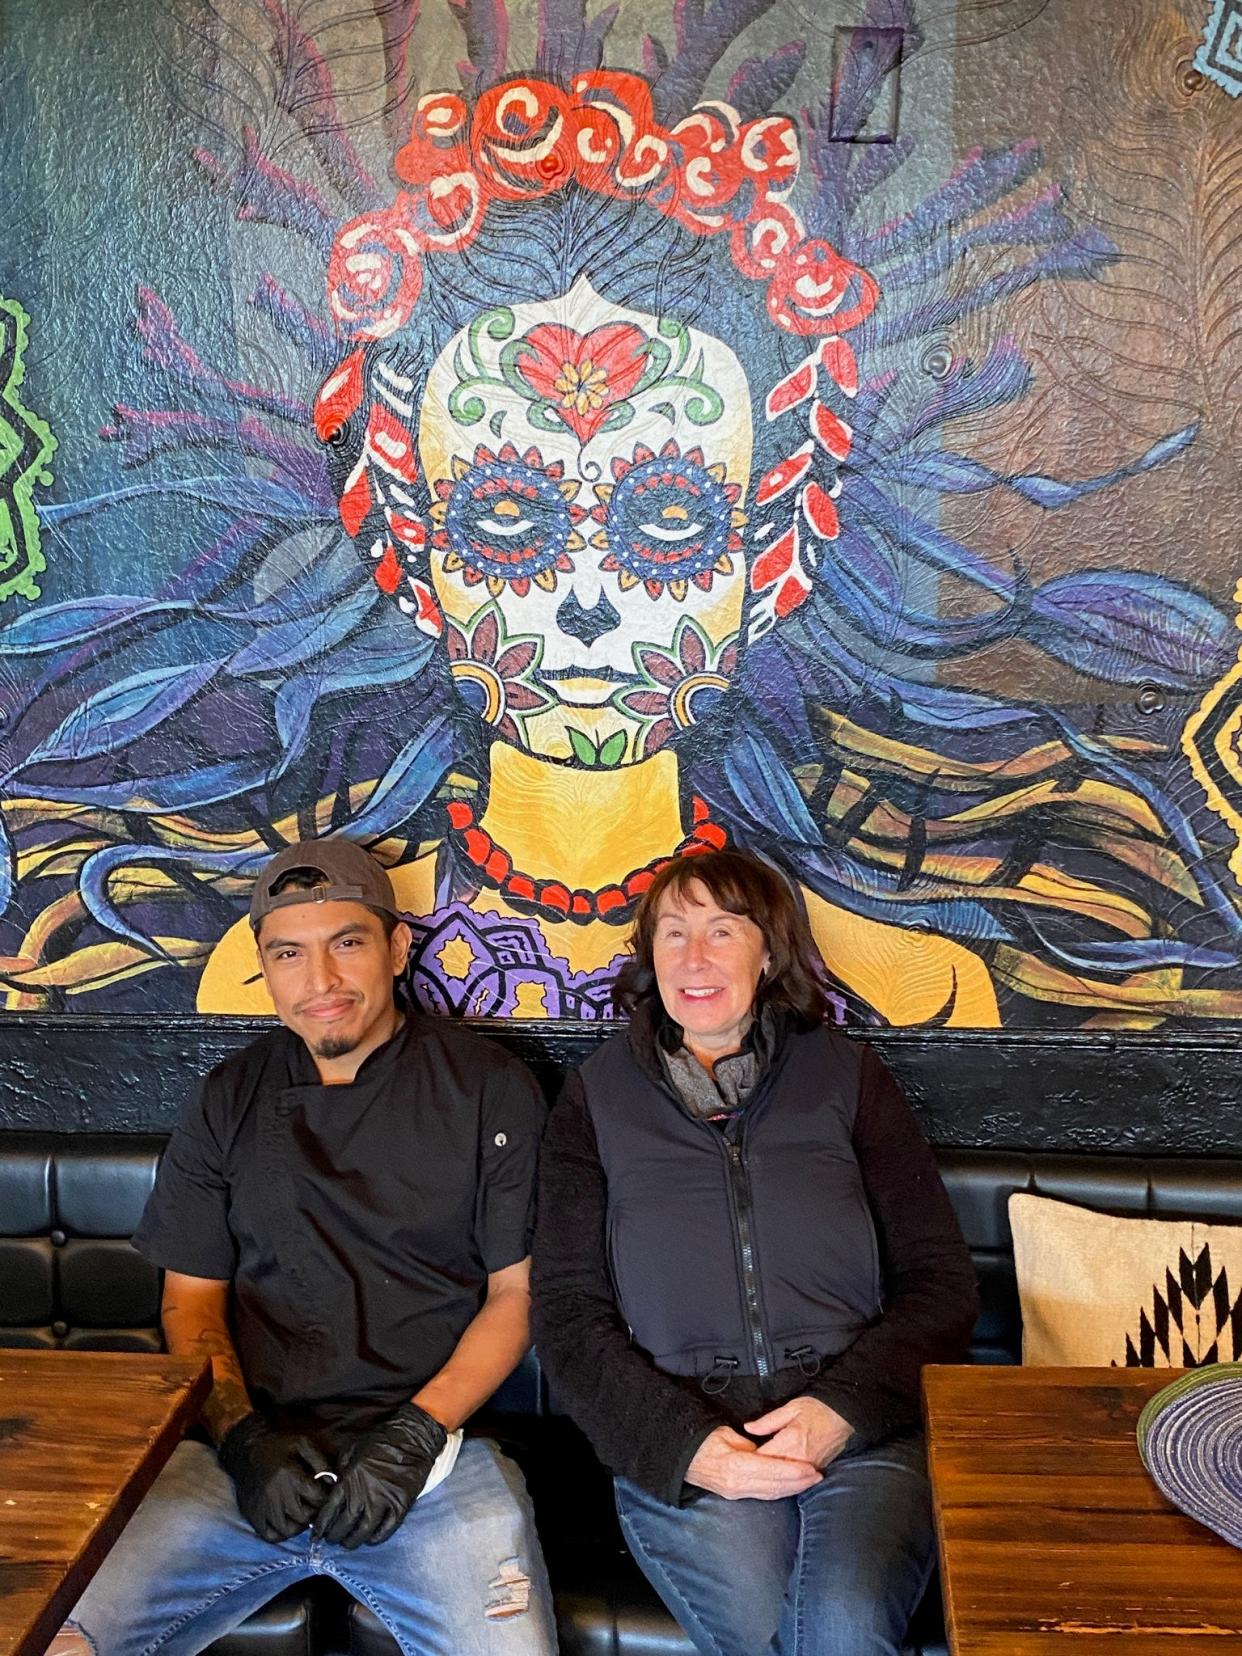 After Jan. 29, owner Peggy Magister is stepping back from La Dama Mexican Kitchen and Bar in Walker's Point, previously Crazy Water. Executive Chef Emanuel Corona, who's worked alongside Magister for more than 20 years, will continue to lead the restaurant.